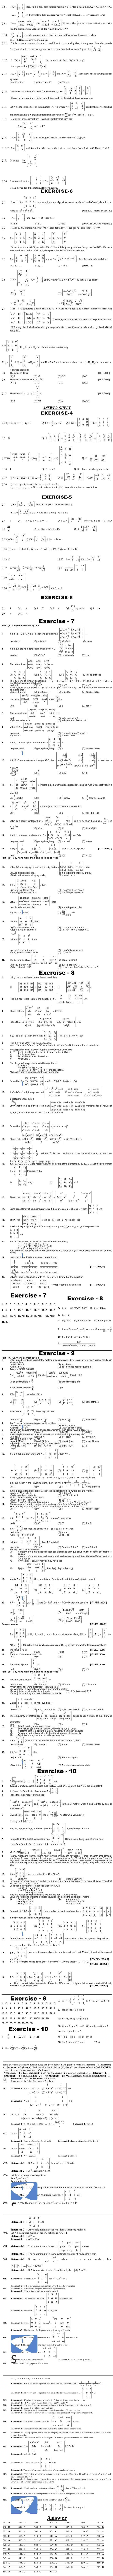 Maths Study Material - Chapter 5